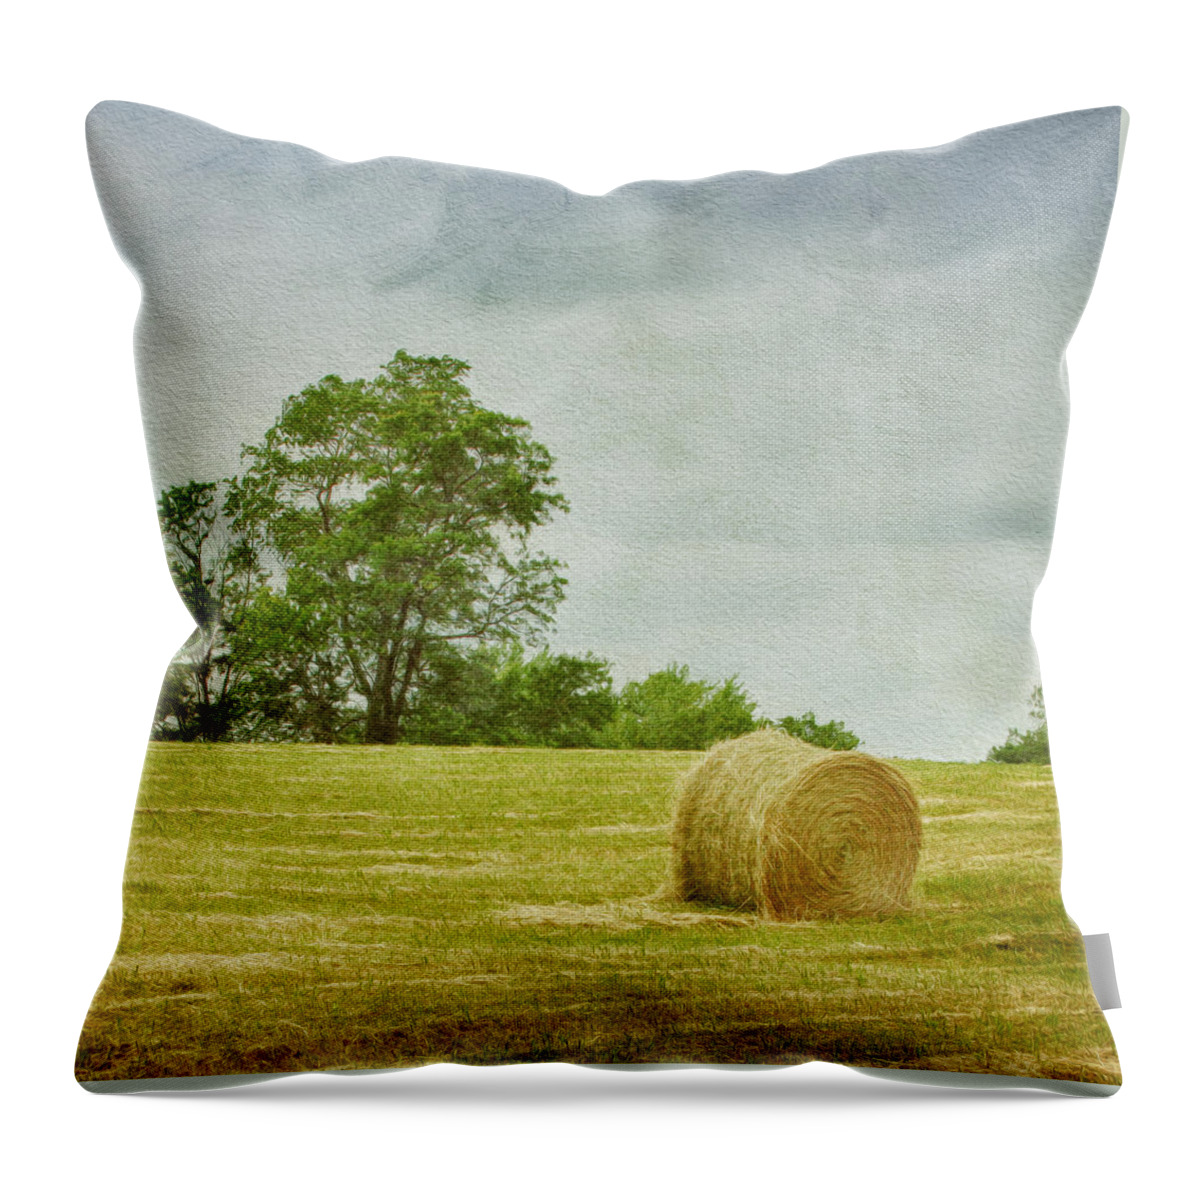 Agricultural Throw Pillow featuring the photograph A Day at the Farm by Kim Hojnacki